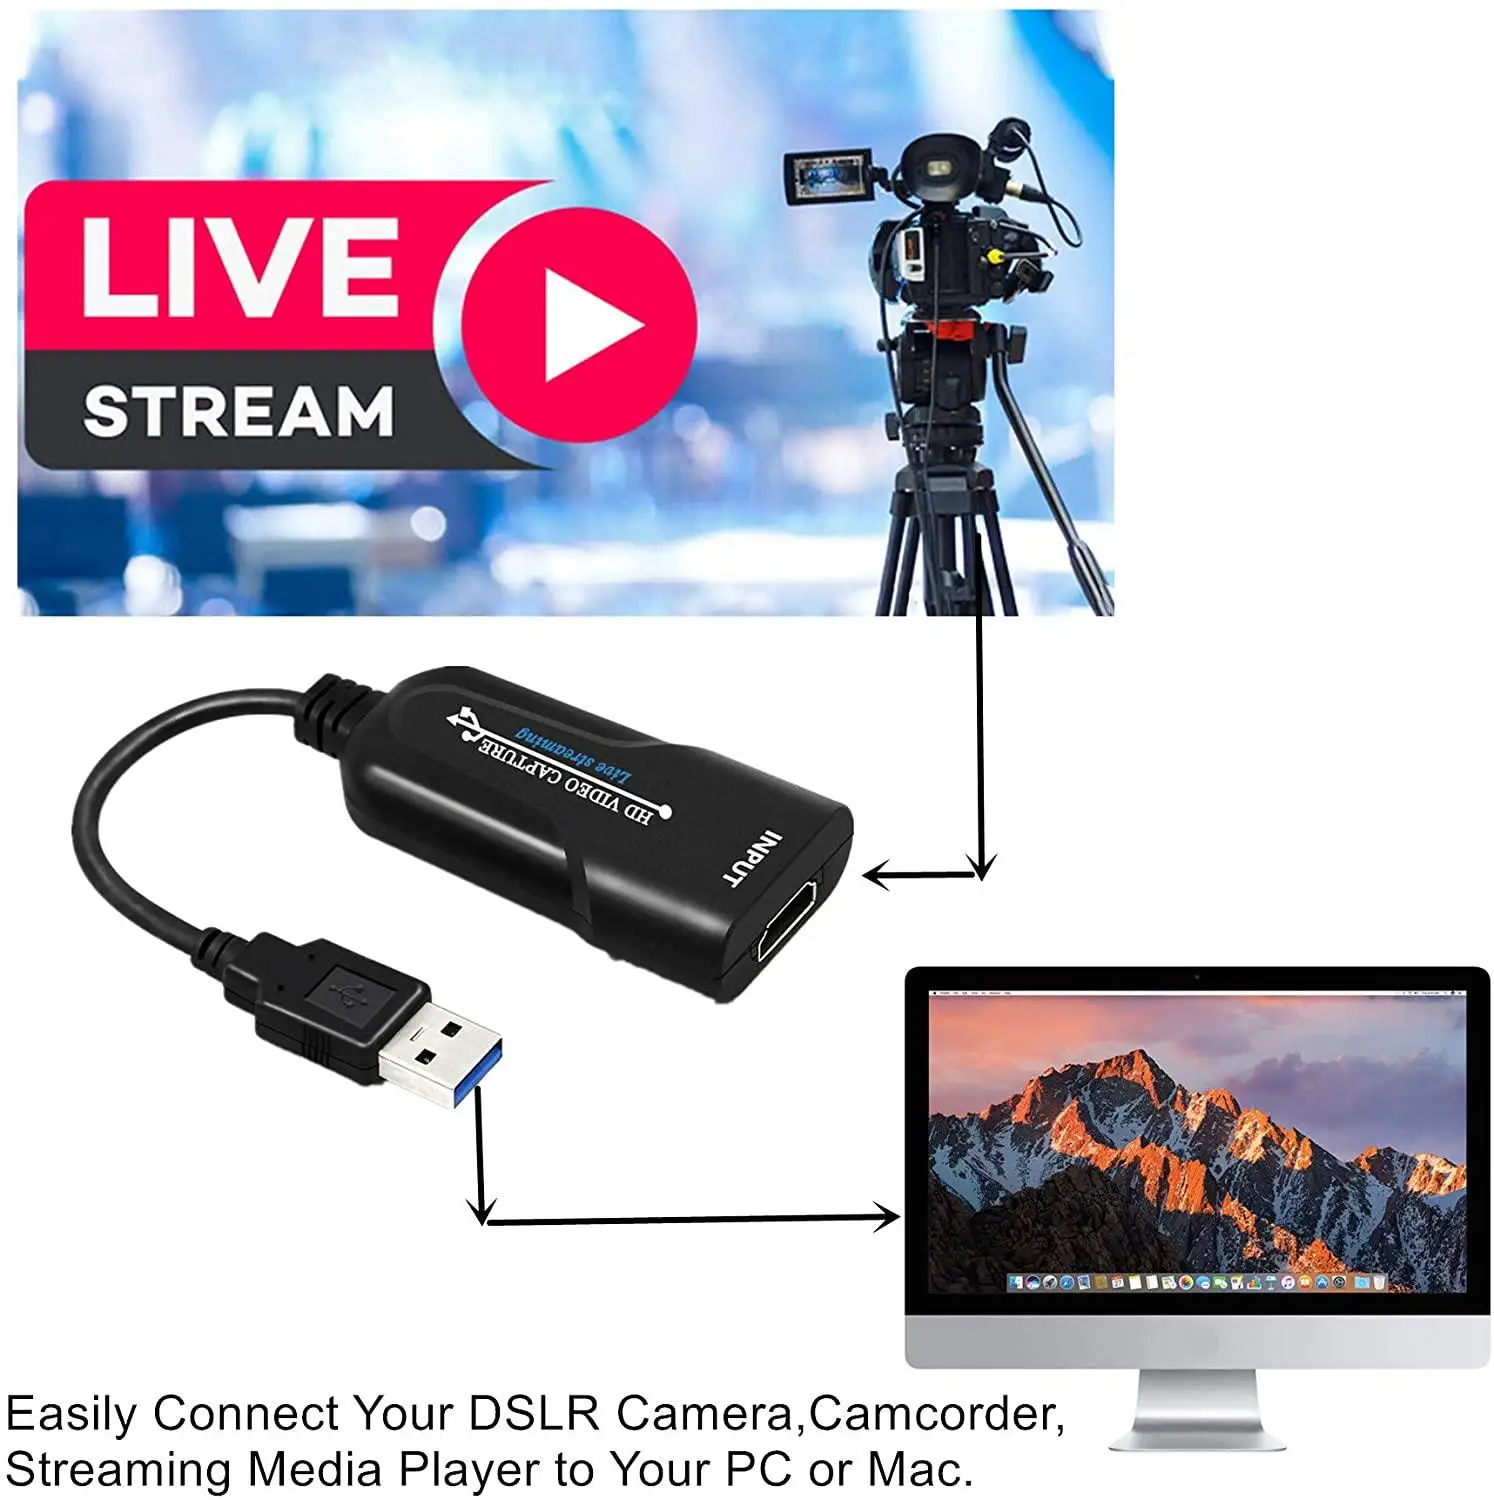 HDMI Video Capture Card HDMI to USB 3.0 Capture Device Up to 1080p 60fps Record Directly to Computer for Gaming, Streaming